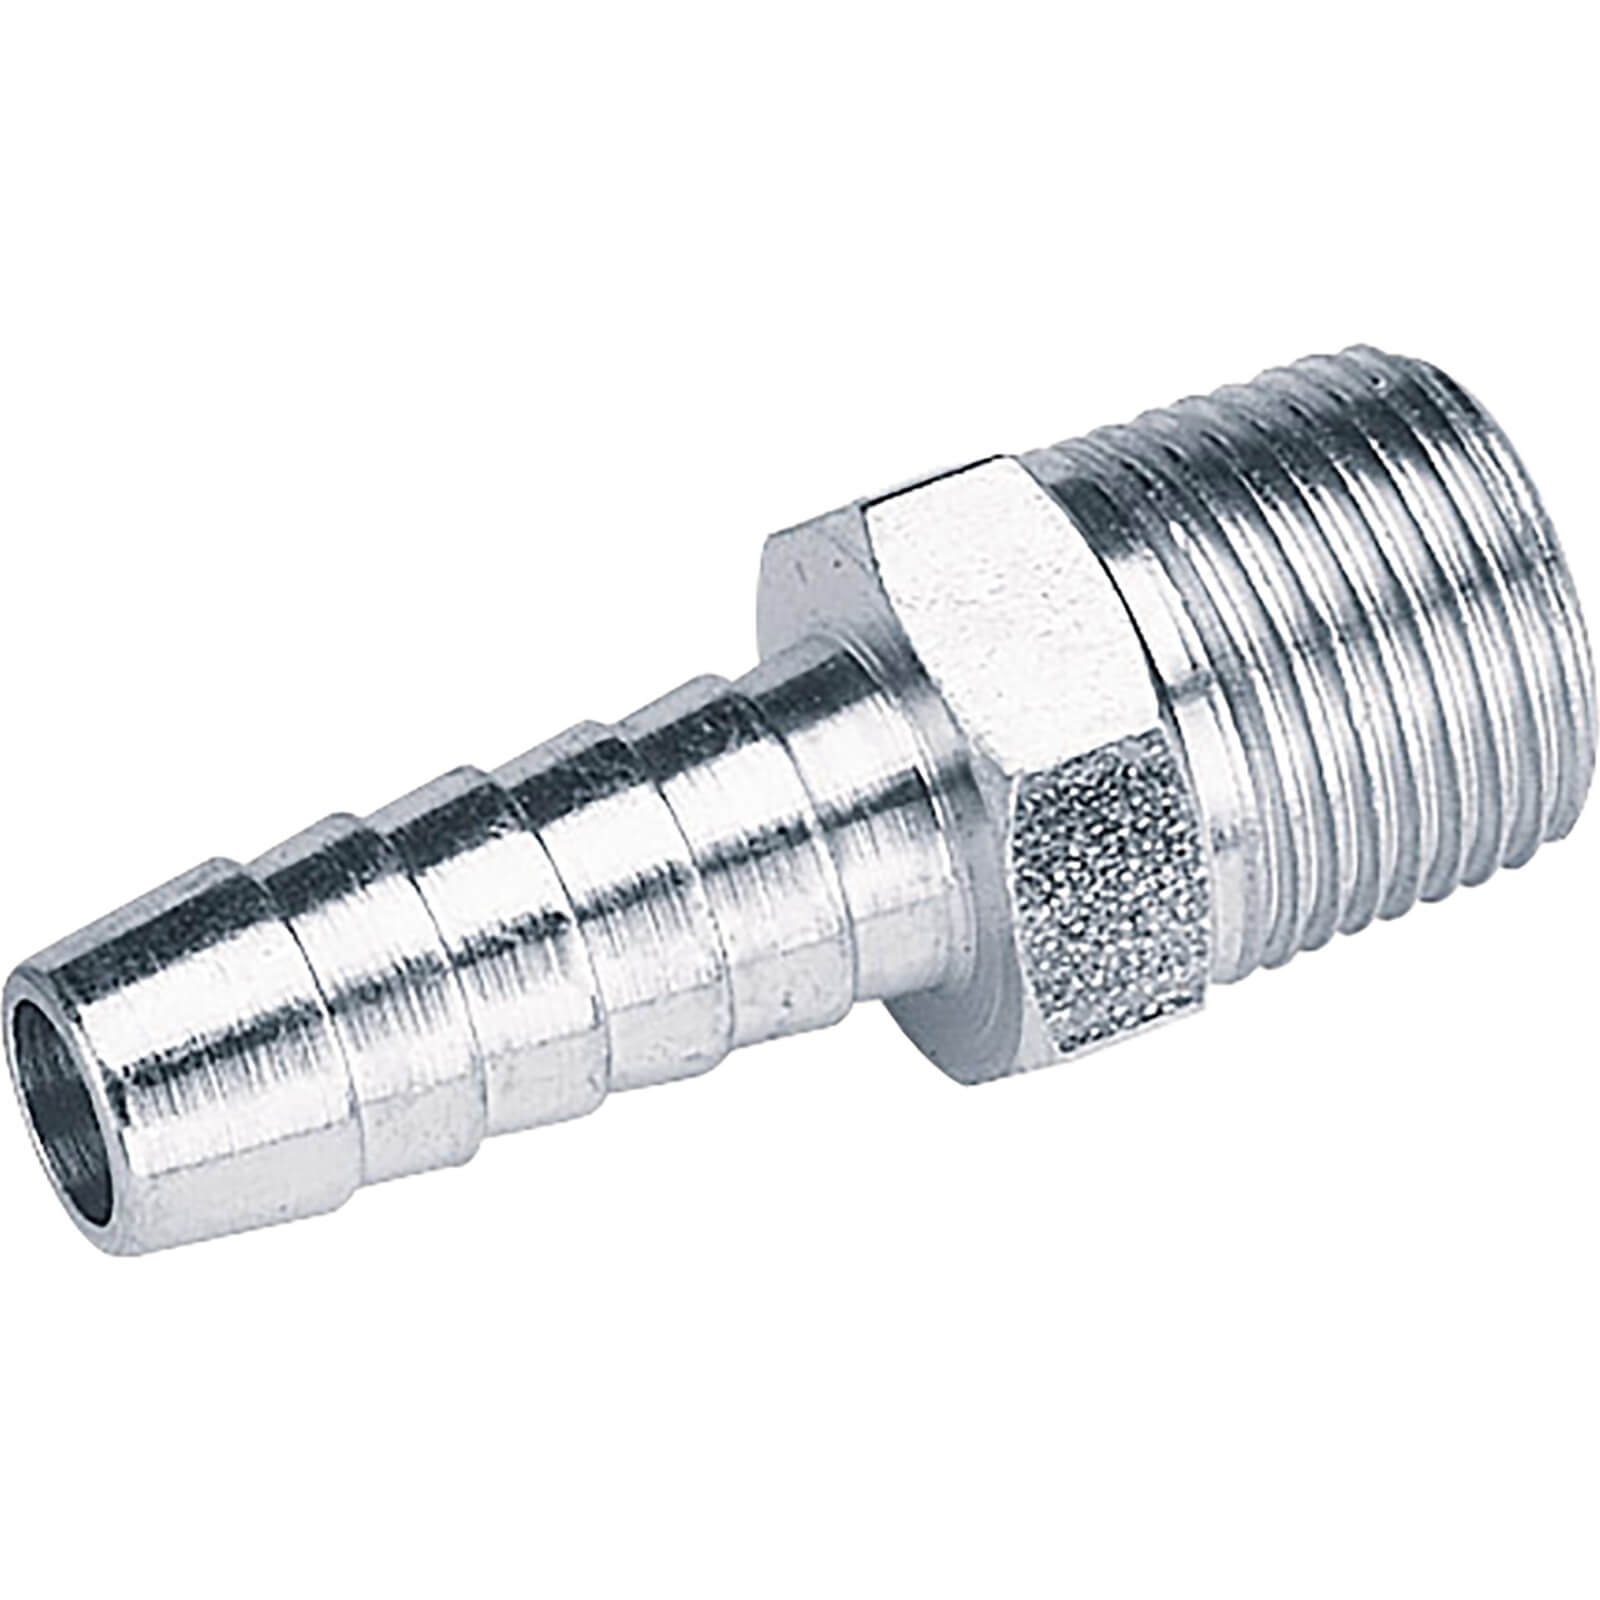 Photos - Equipment Accessory Draper PCL Tailpiece Air Line Fitting BSPT Male Thread 3/8" BSP 3/8" Pack 